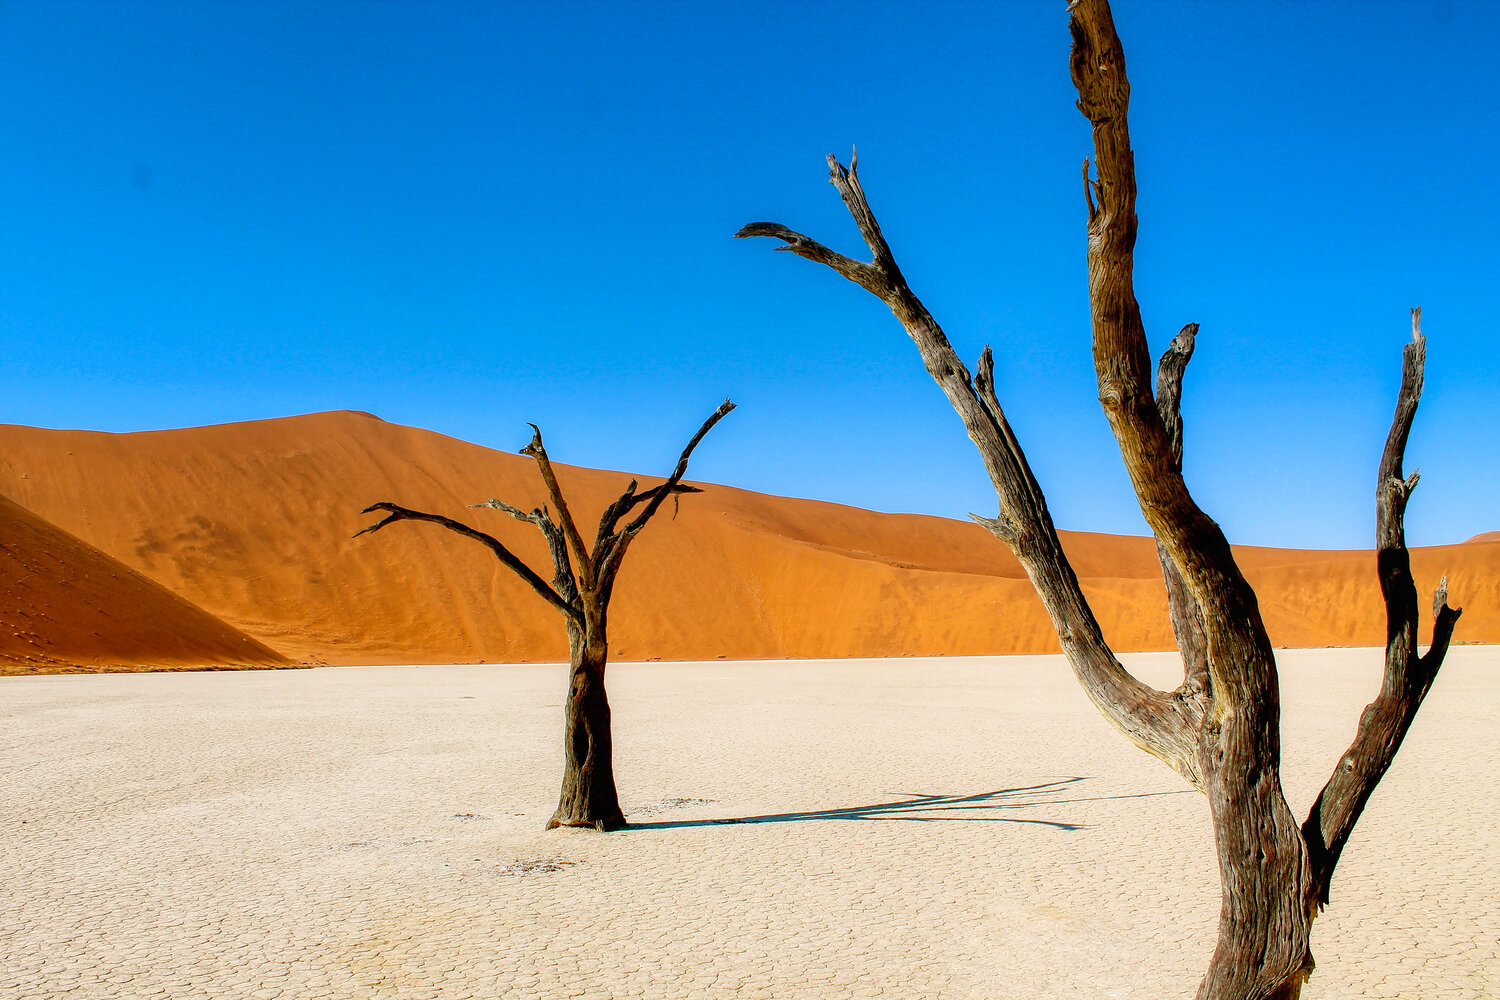 Are You One of the 10% Who Can Get at Least 18 on This 24-Question Geography Quiz? Namib Desert, Namibia